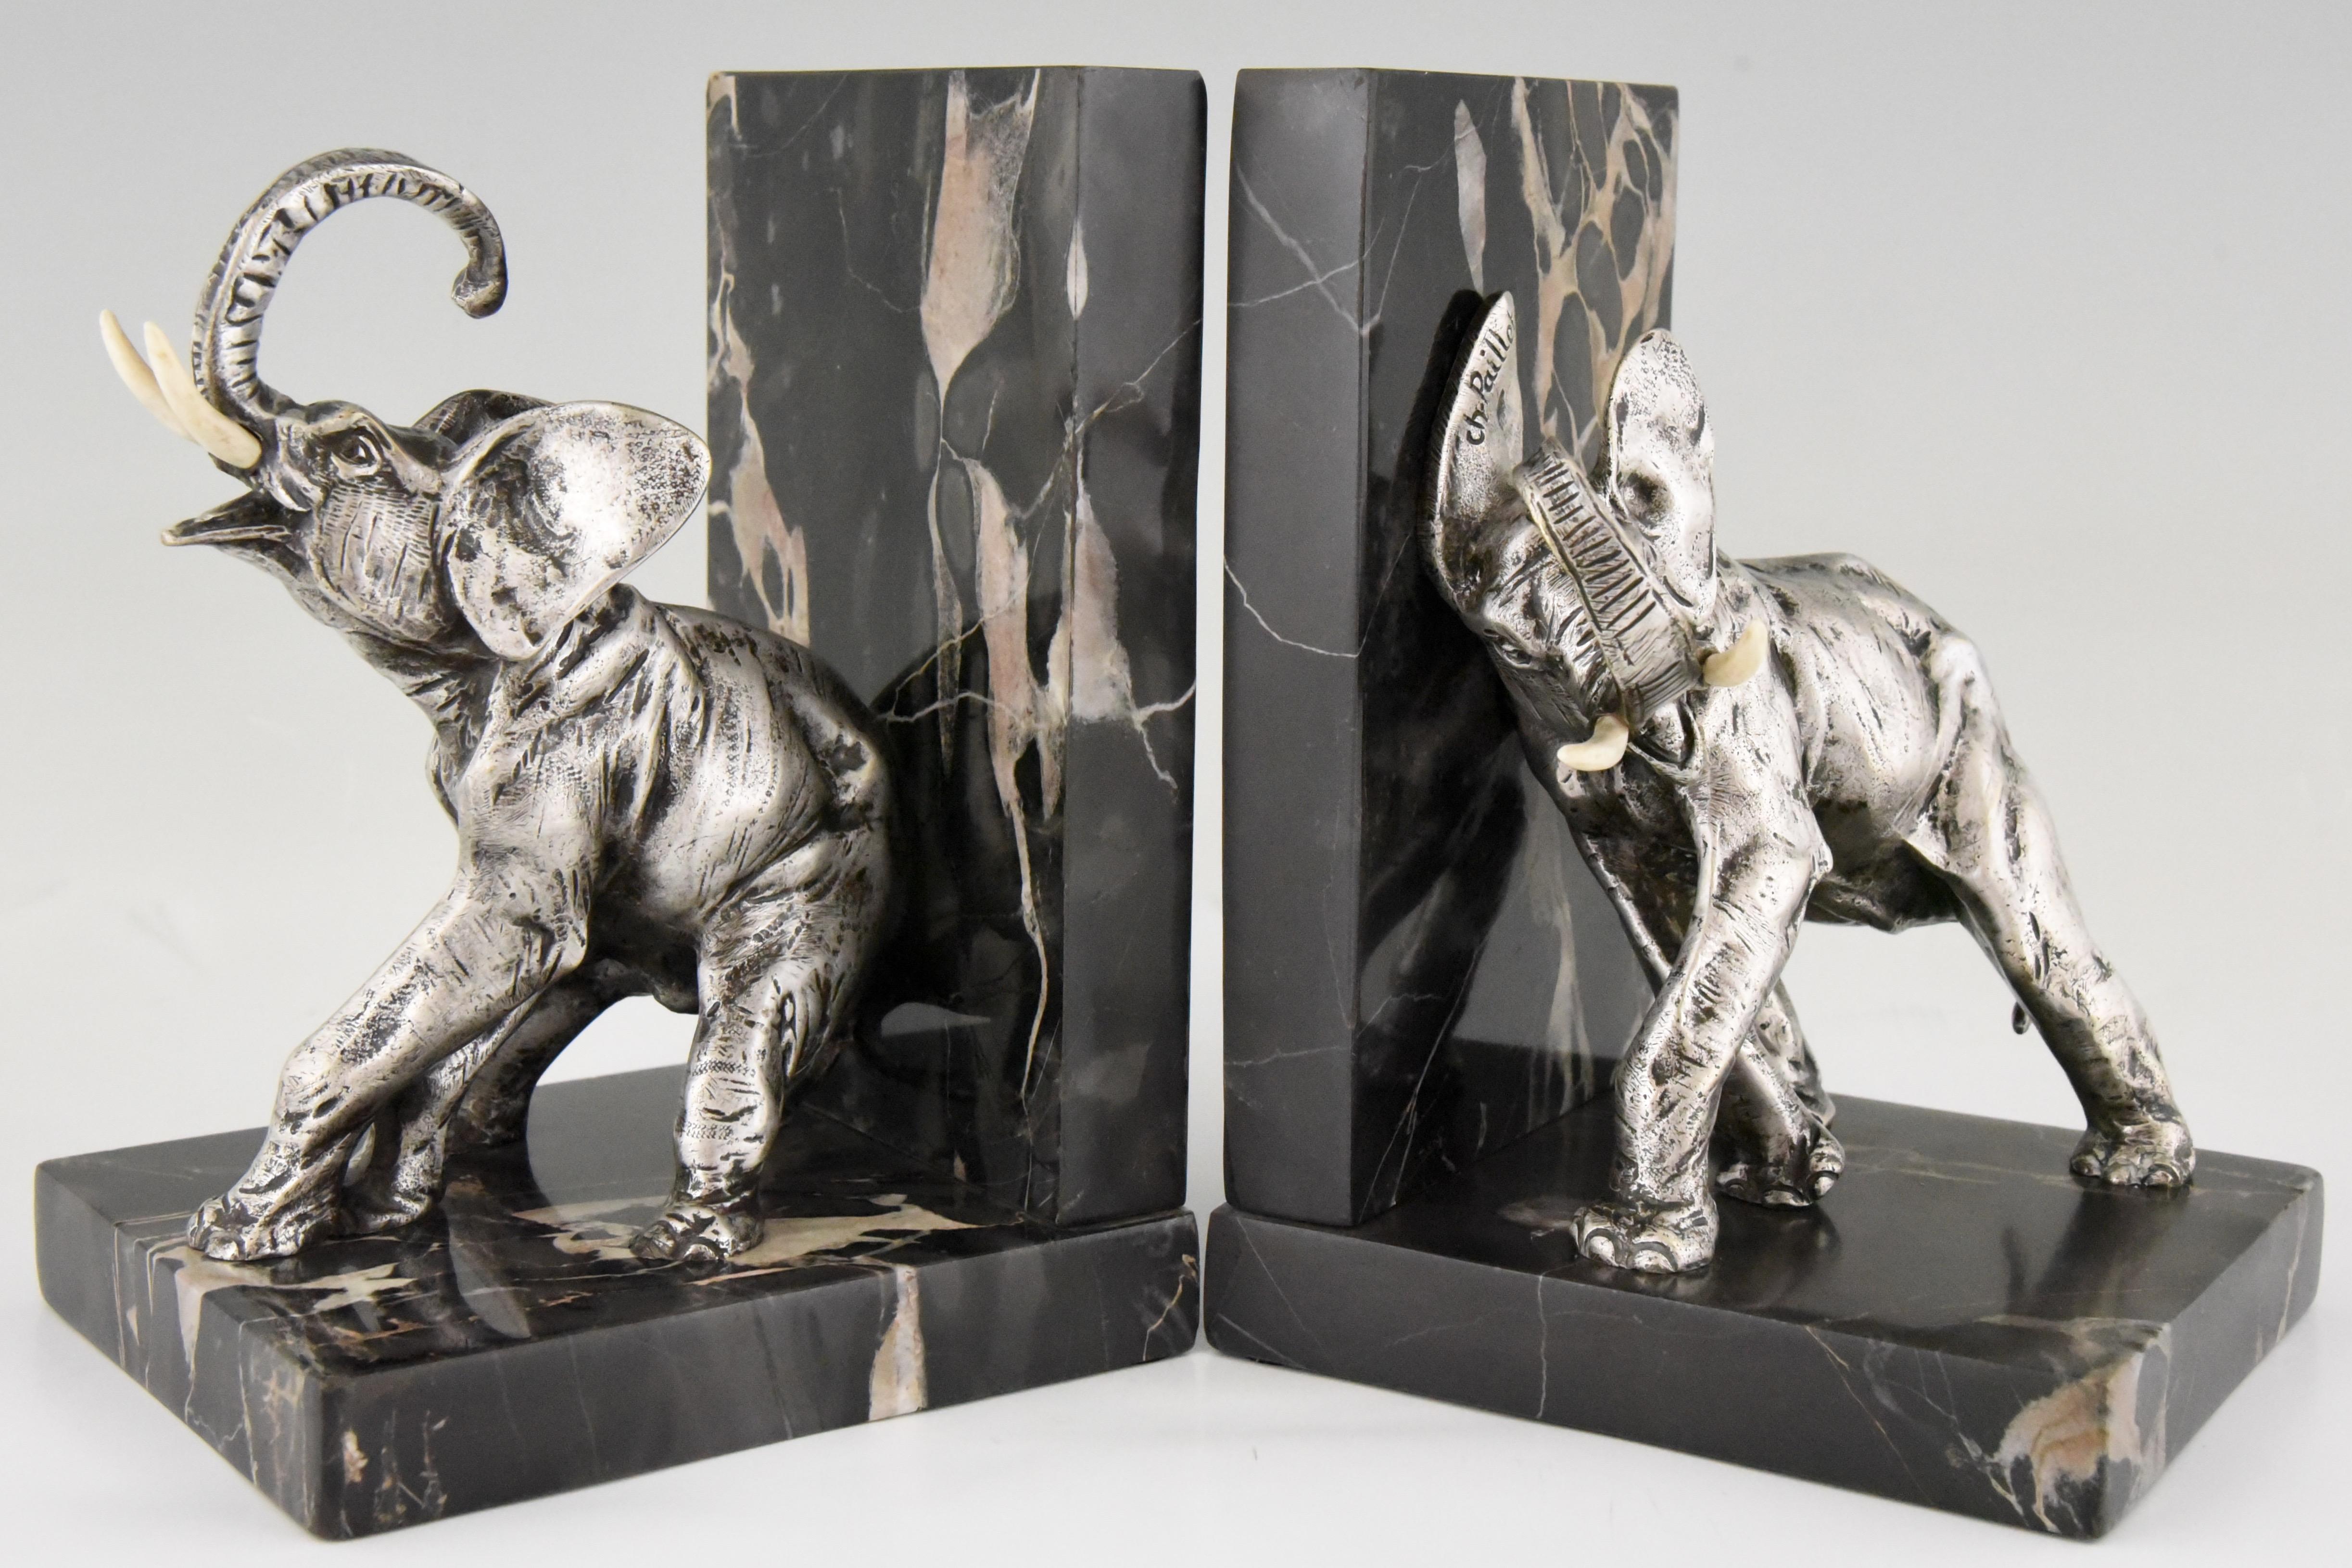 Art Deco bronze elephant bookends with silver patina on portor marble base.
Signed by Charles Paillet who lived in France, 1871-1937.
Literature:
“Animals in bronze” by Christopher Payne. ?Antique collectors club. ?“Les bronzes de XIXe siècle” by